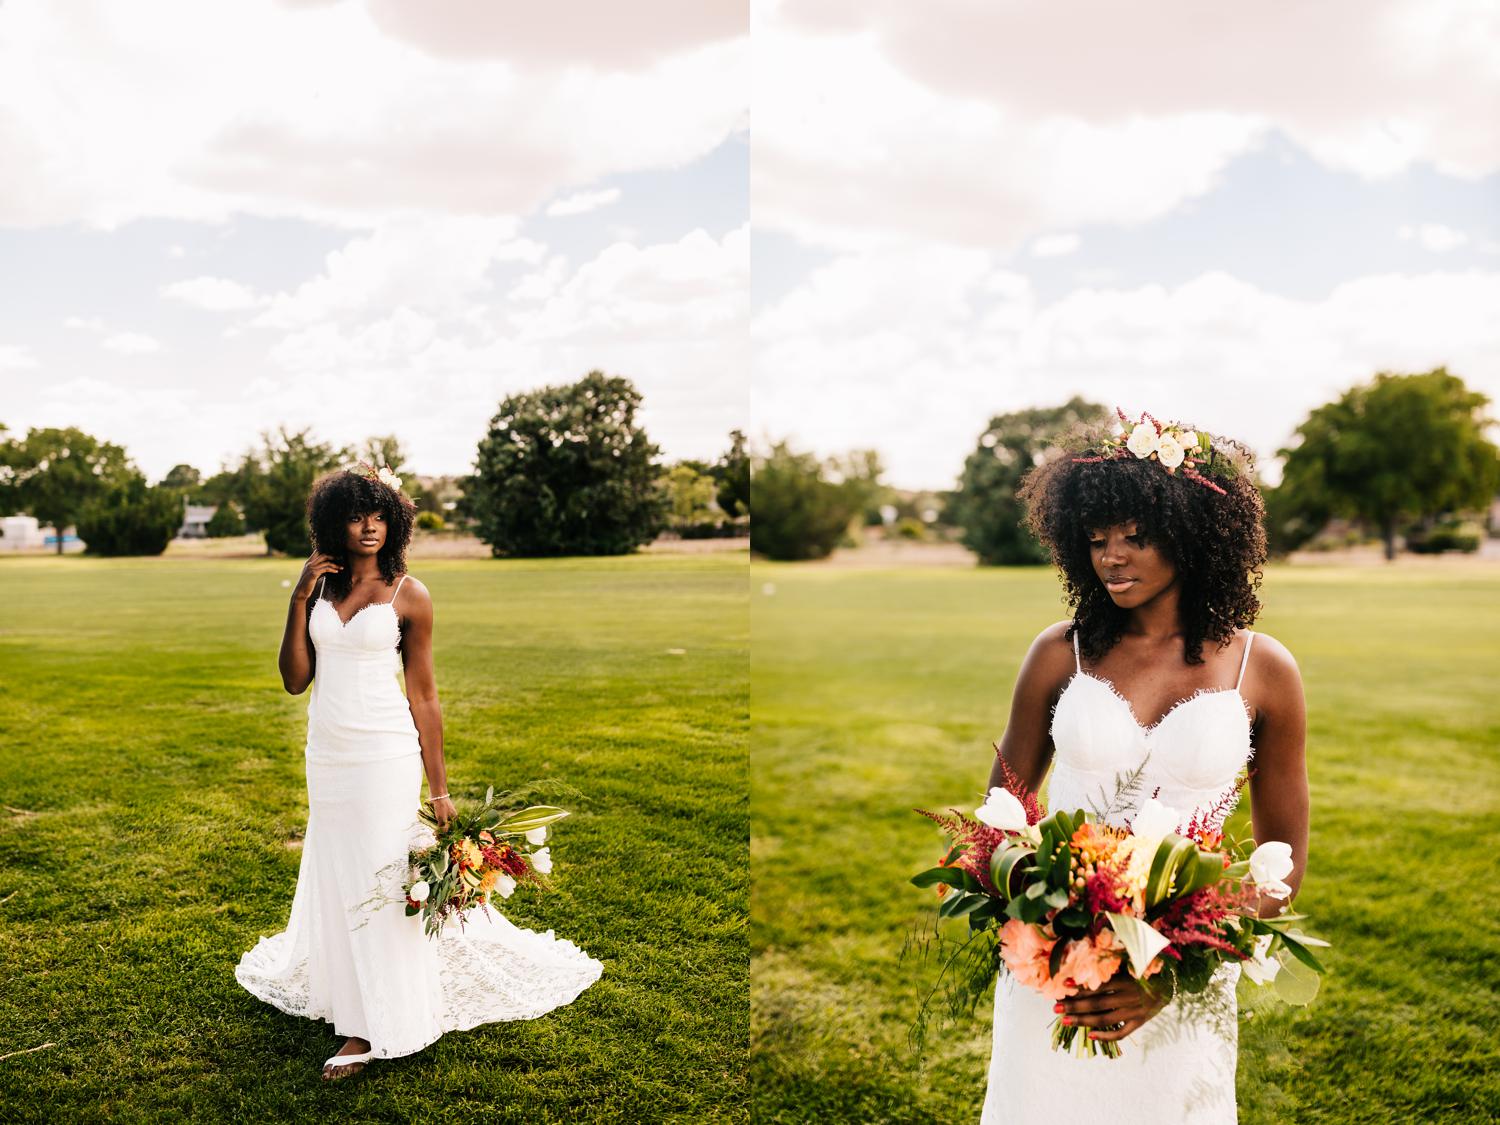 Bride in gown carrying vivid bouquet in Albuquerque, New Mexico wedding